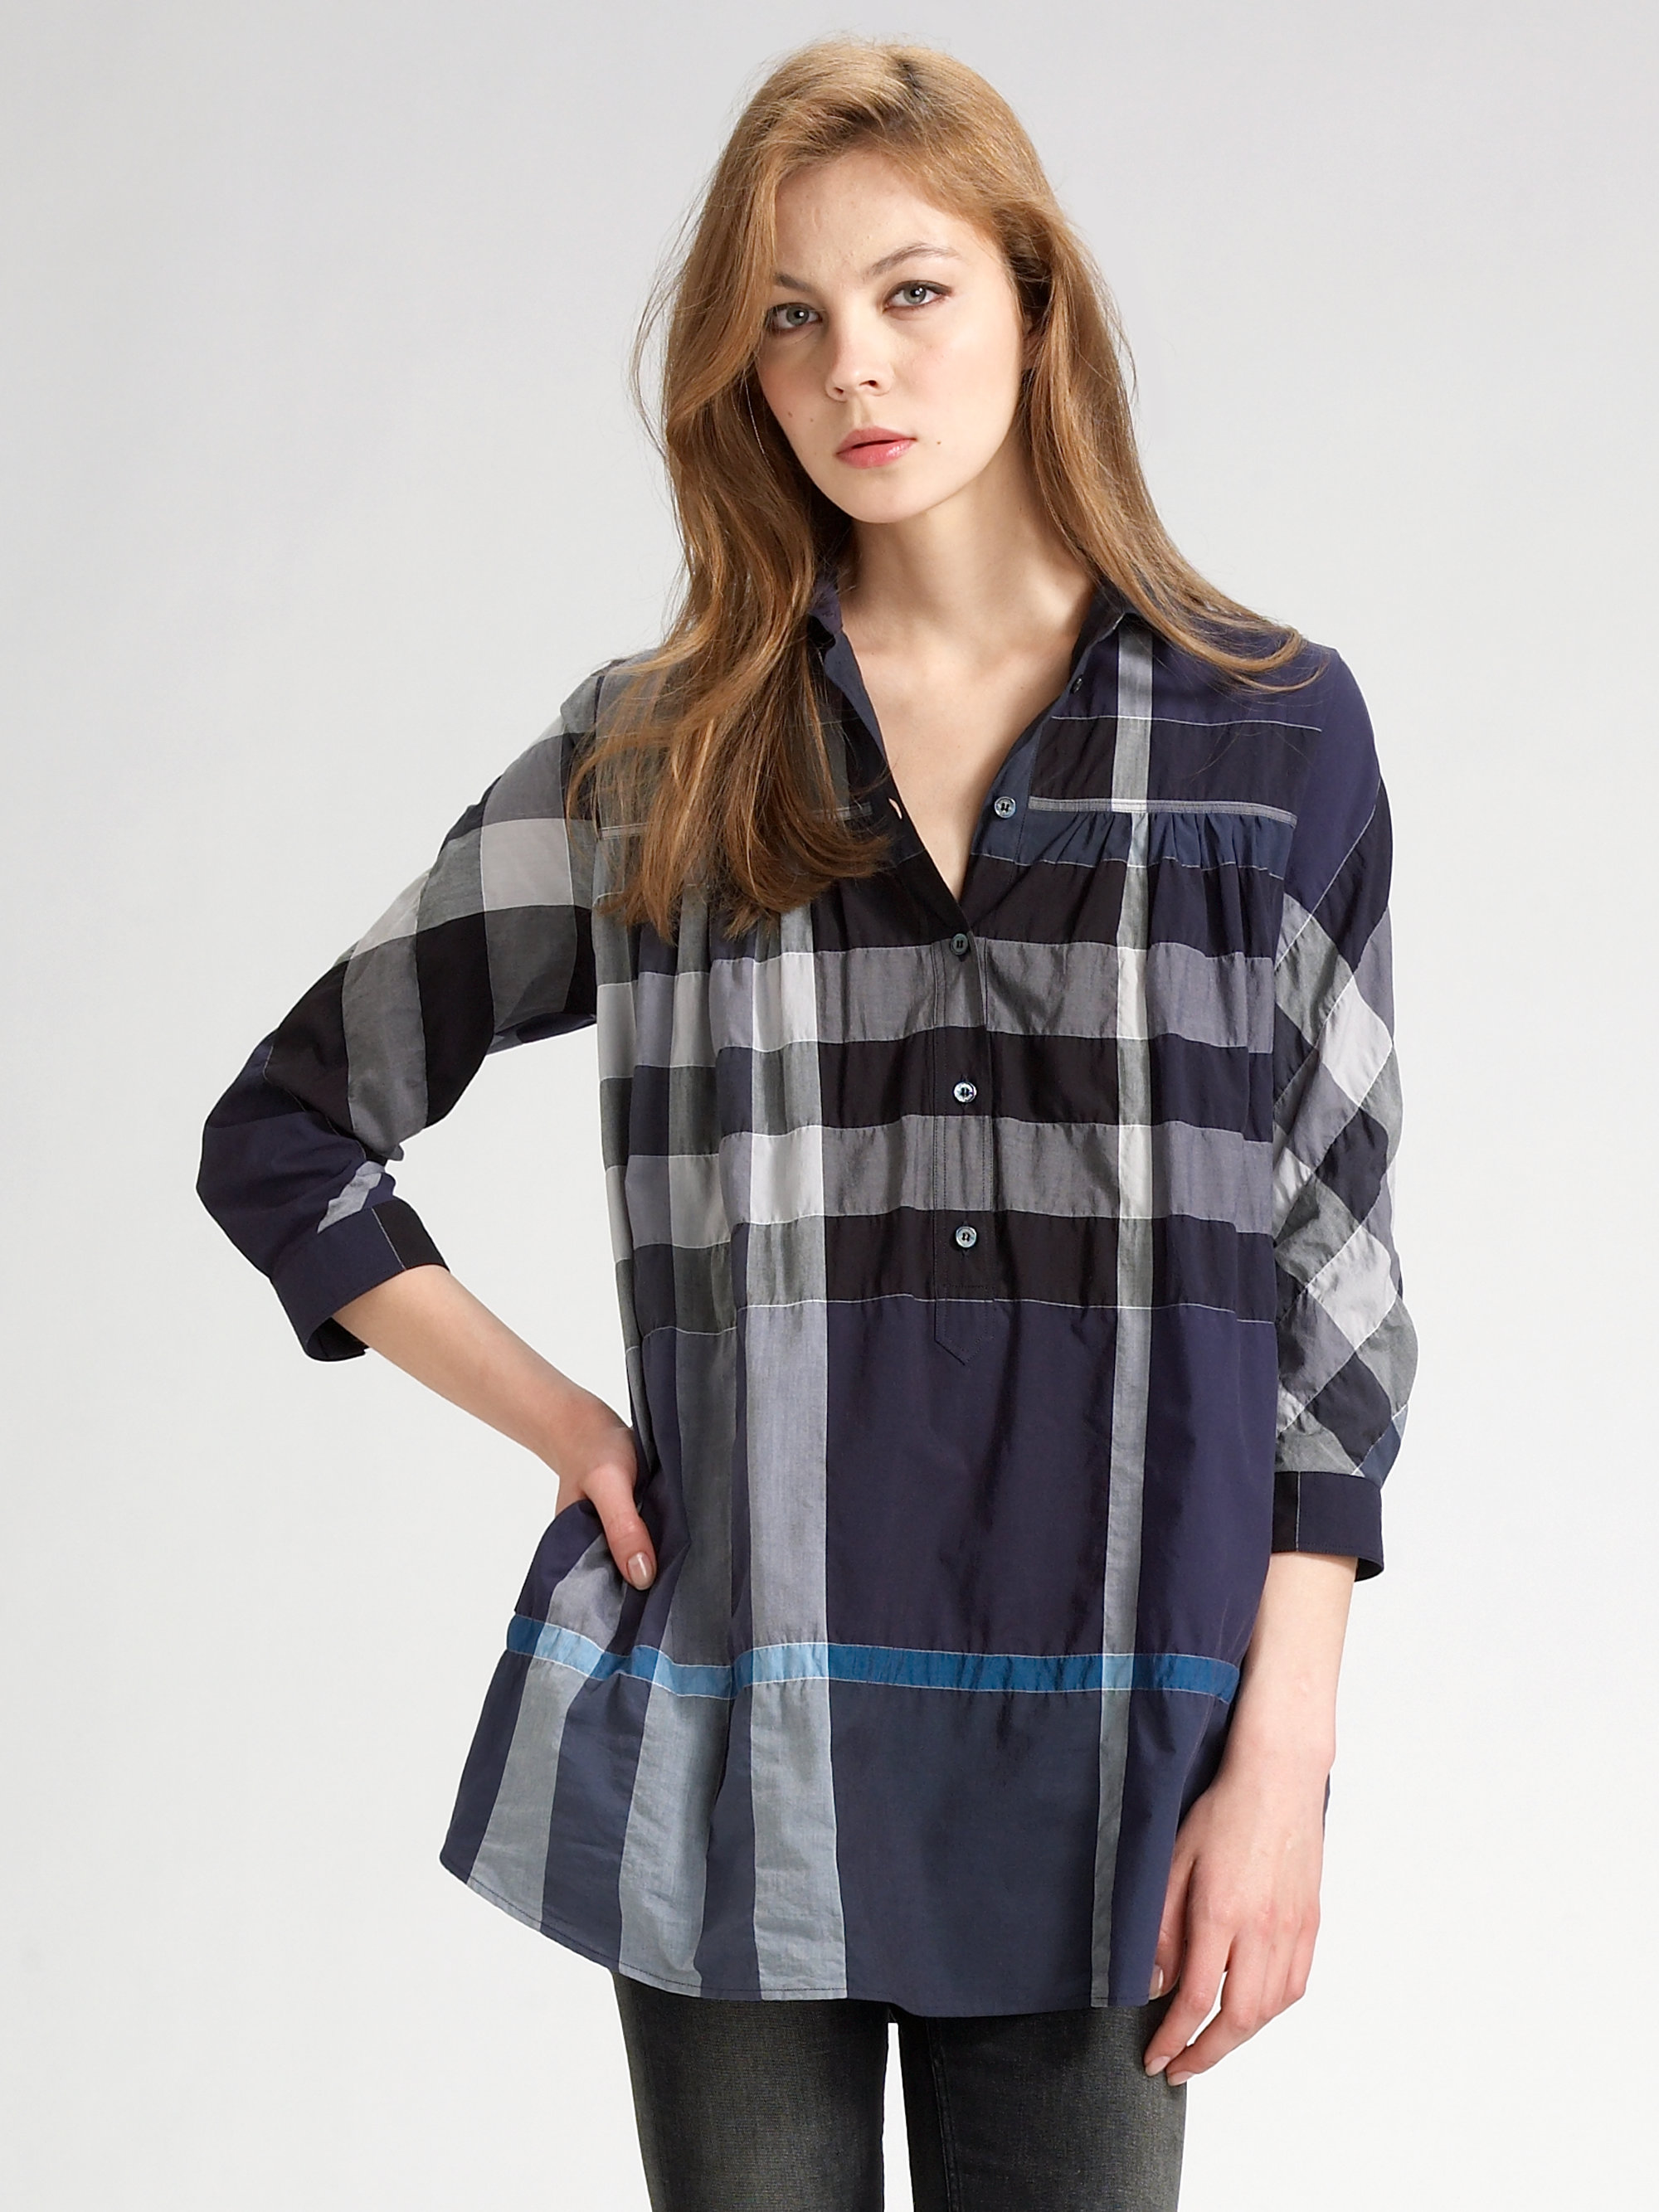 Burberry Brit Check Tunic in Navy (Blue) - Lyst